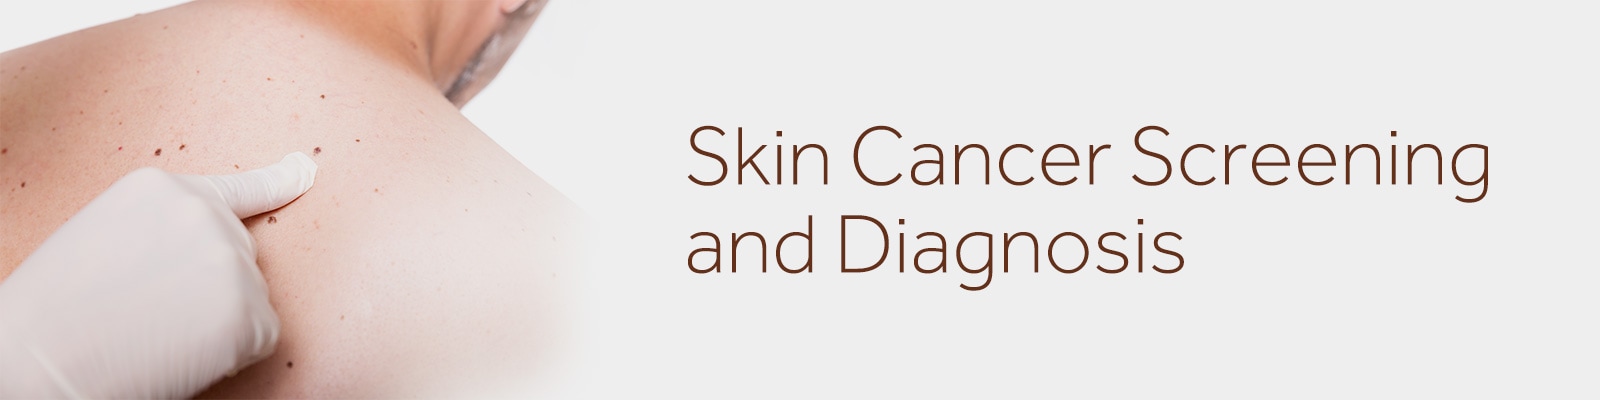 Skin Cancer Screening and Diagnosis equipment and supplies